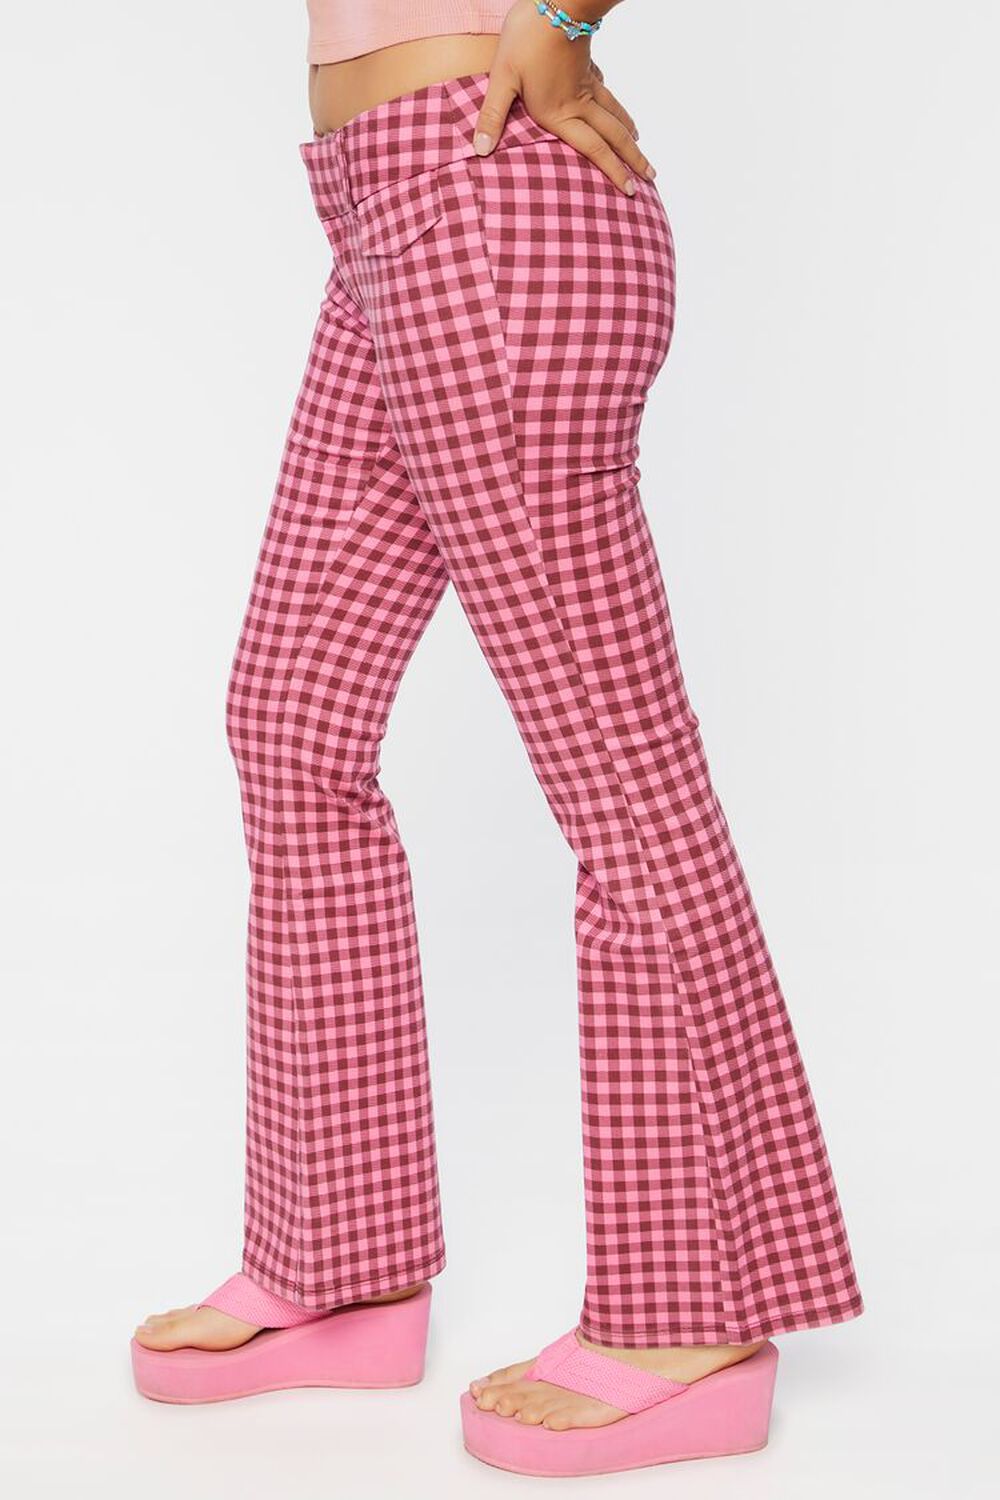 Gingham Low-Rise Flare Pants, image 3